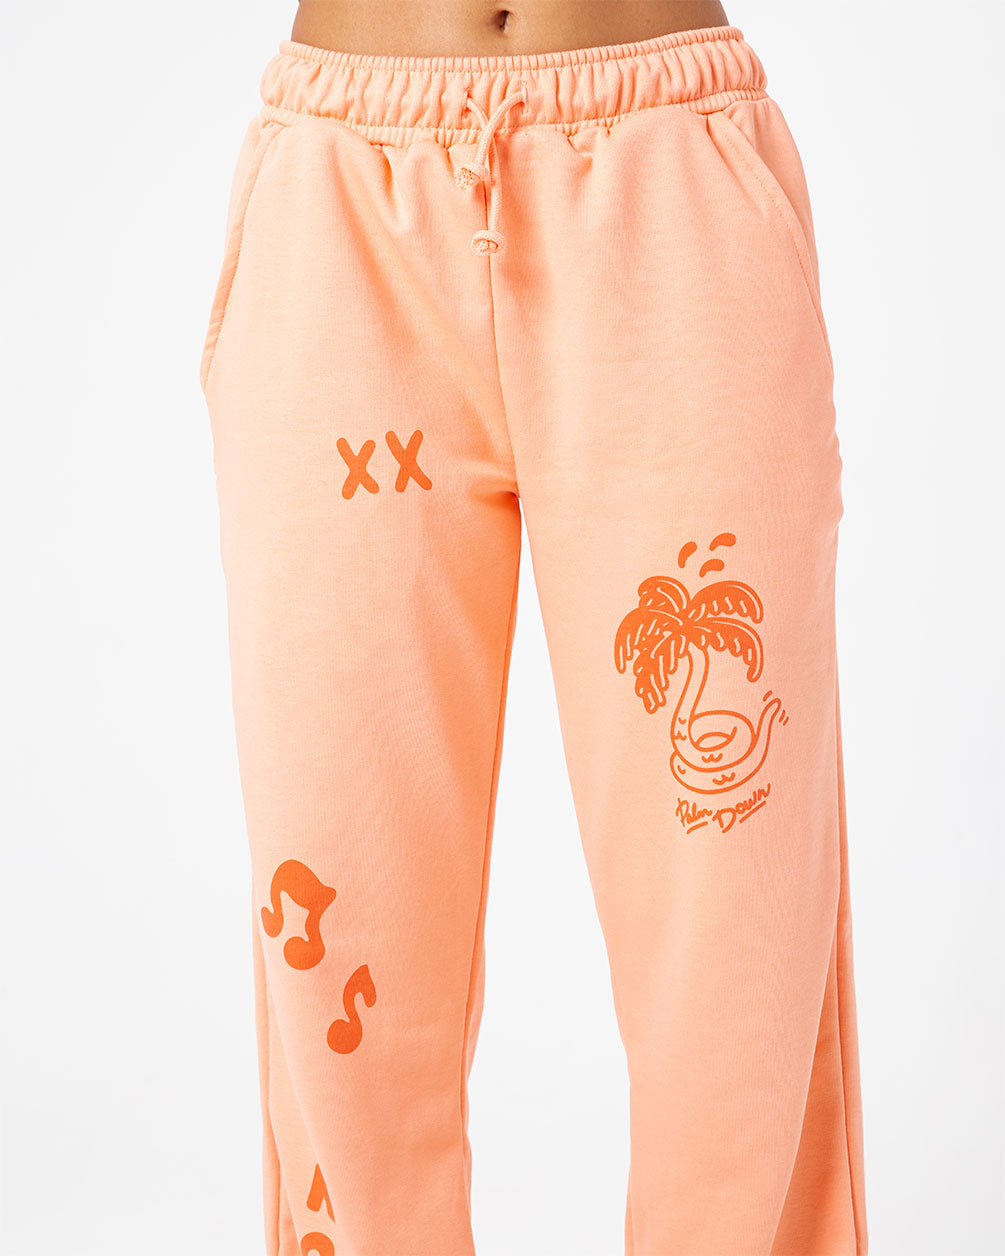 Peach Swants (Sweatpants) Swants IN YOUR SHOE M 